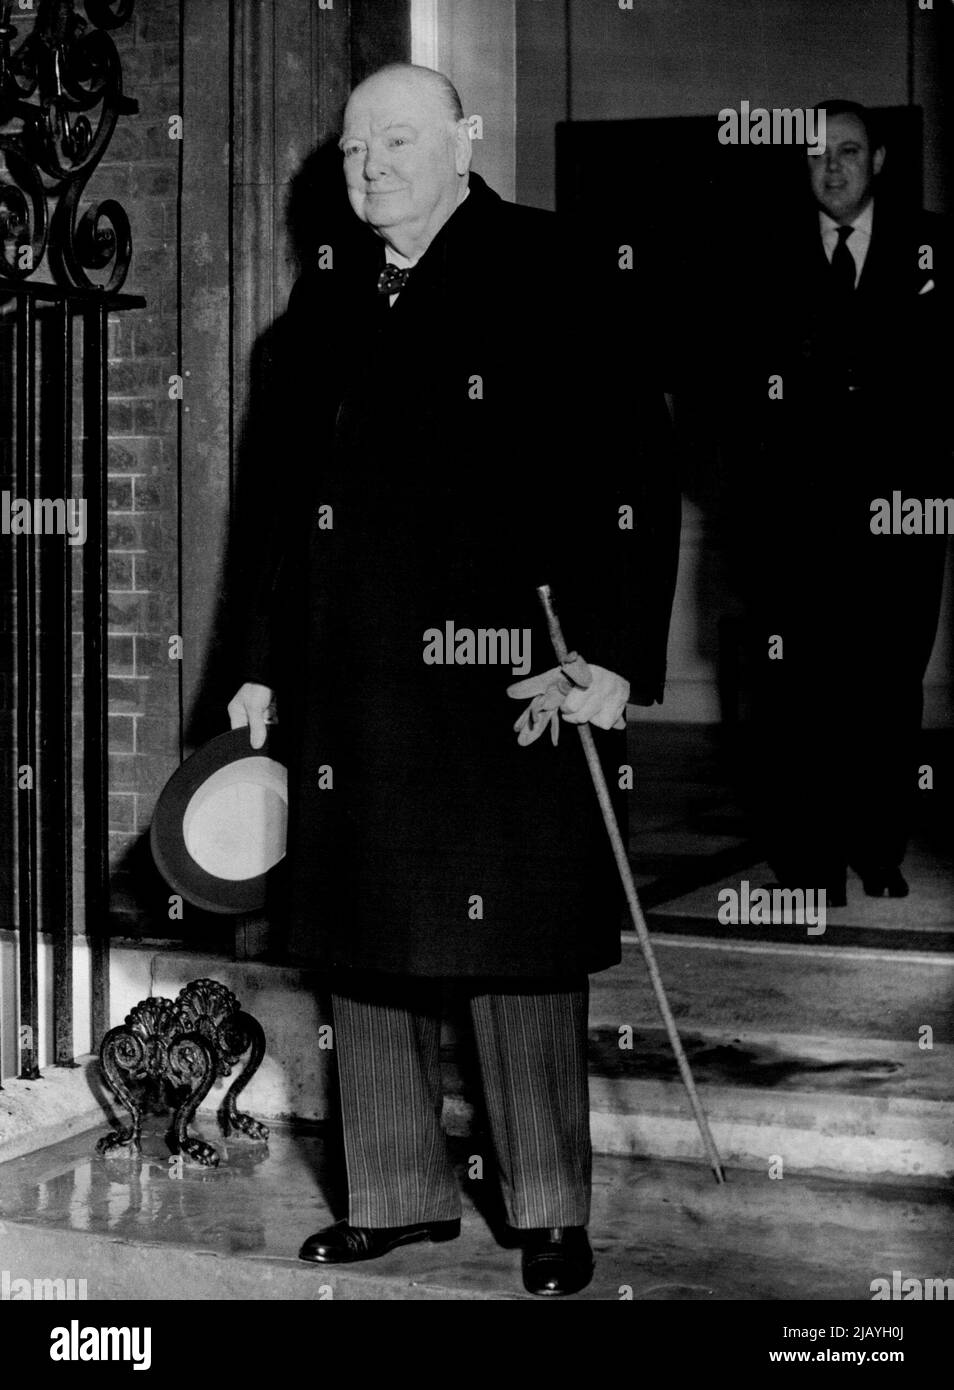 Churchill's First 80th Birthday Picture: This photo was made as Premier Sir Winston Churchill left 10 Downing Street en route to the house of Lords for the state opening of Parliament this morning November 30 - his 80th Birthday. November 30, 1954. (Photo by Associated Press Photo). Stock Photo